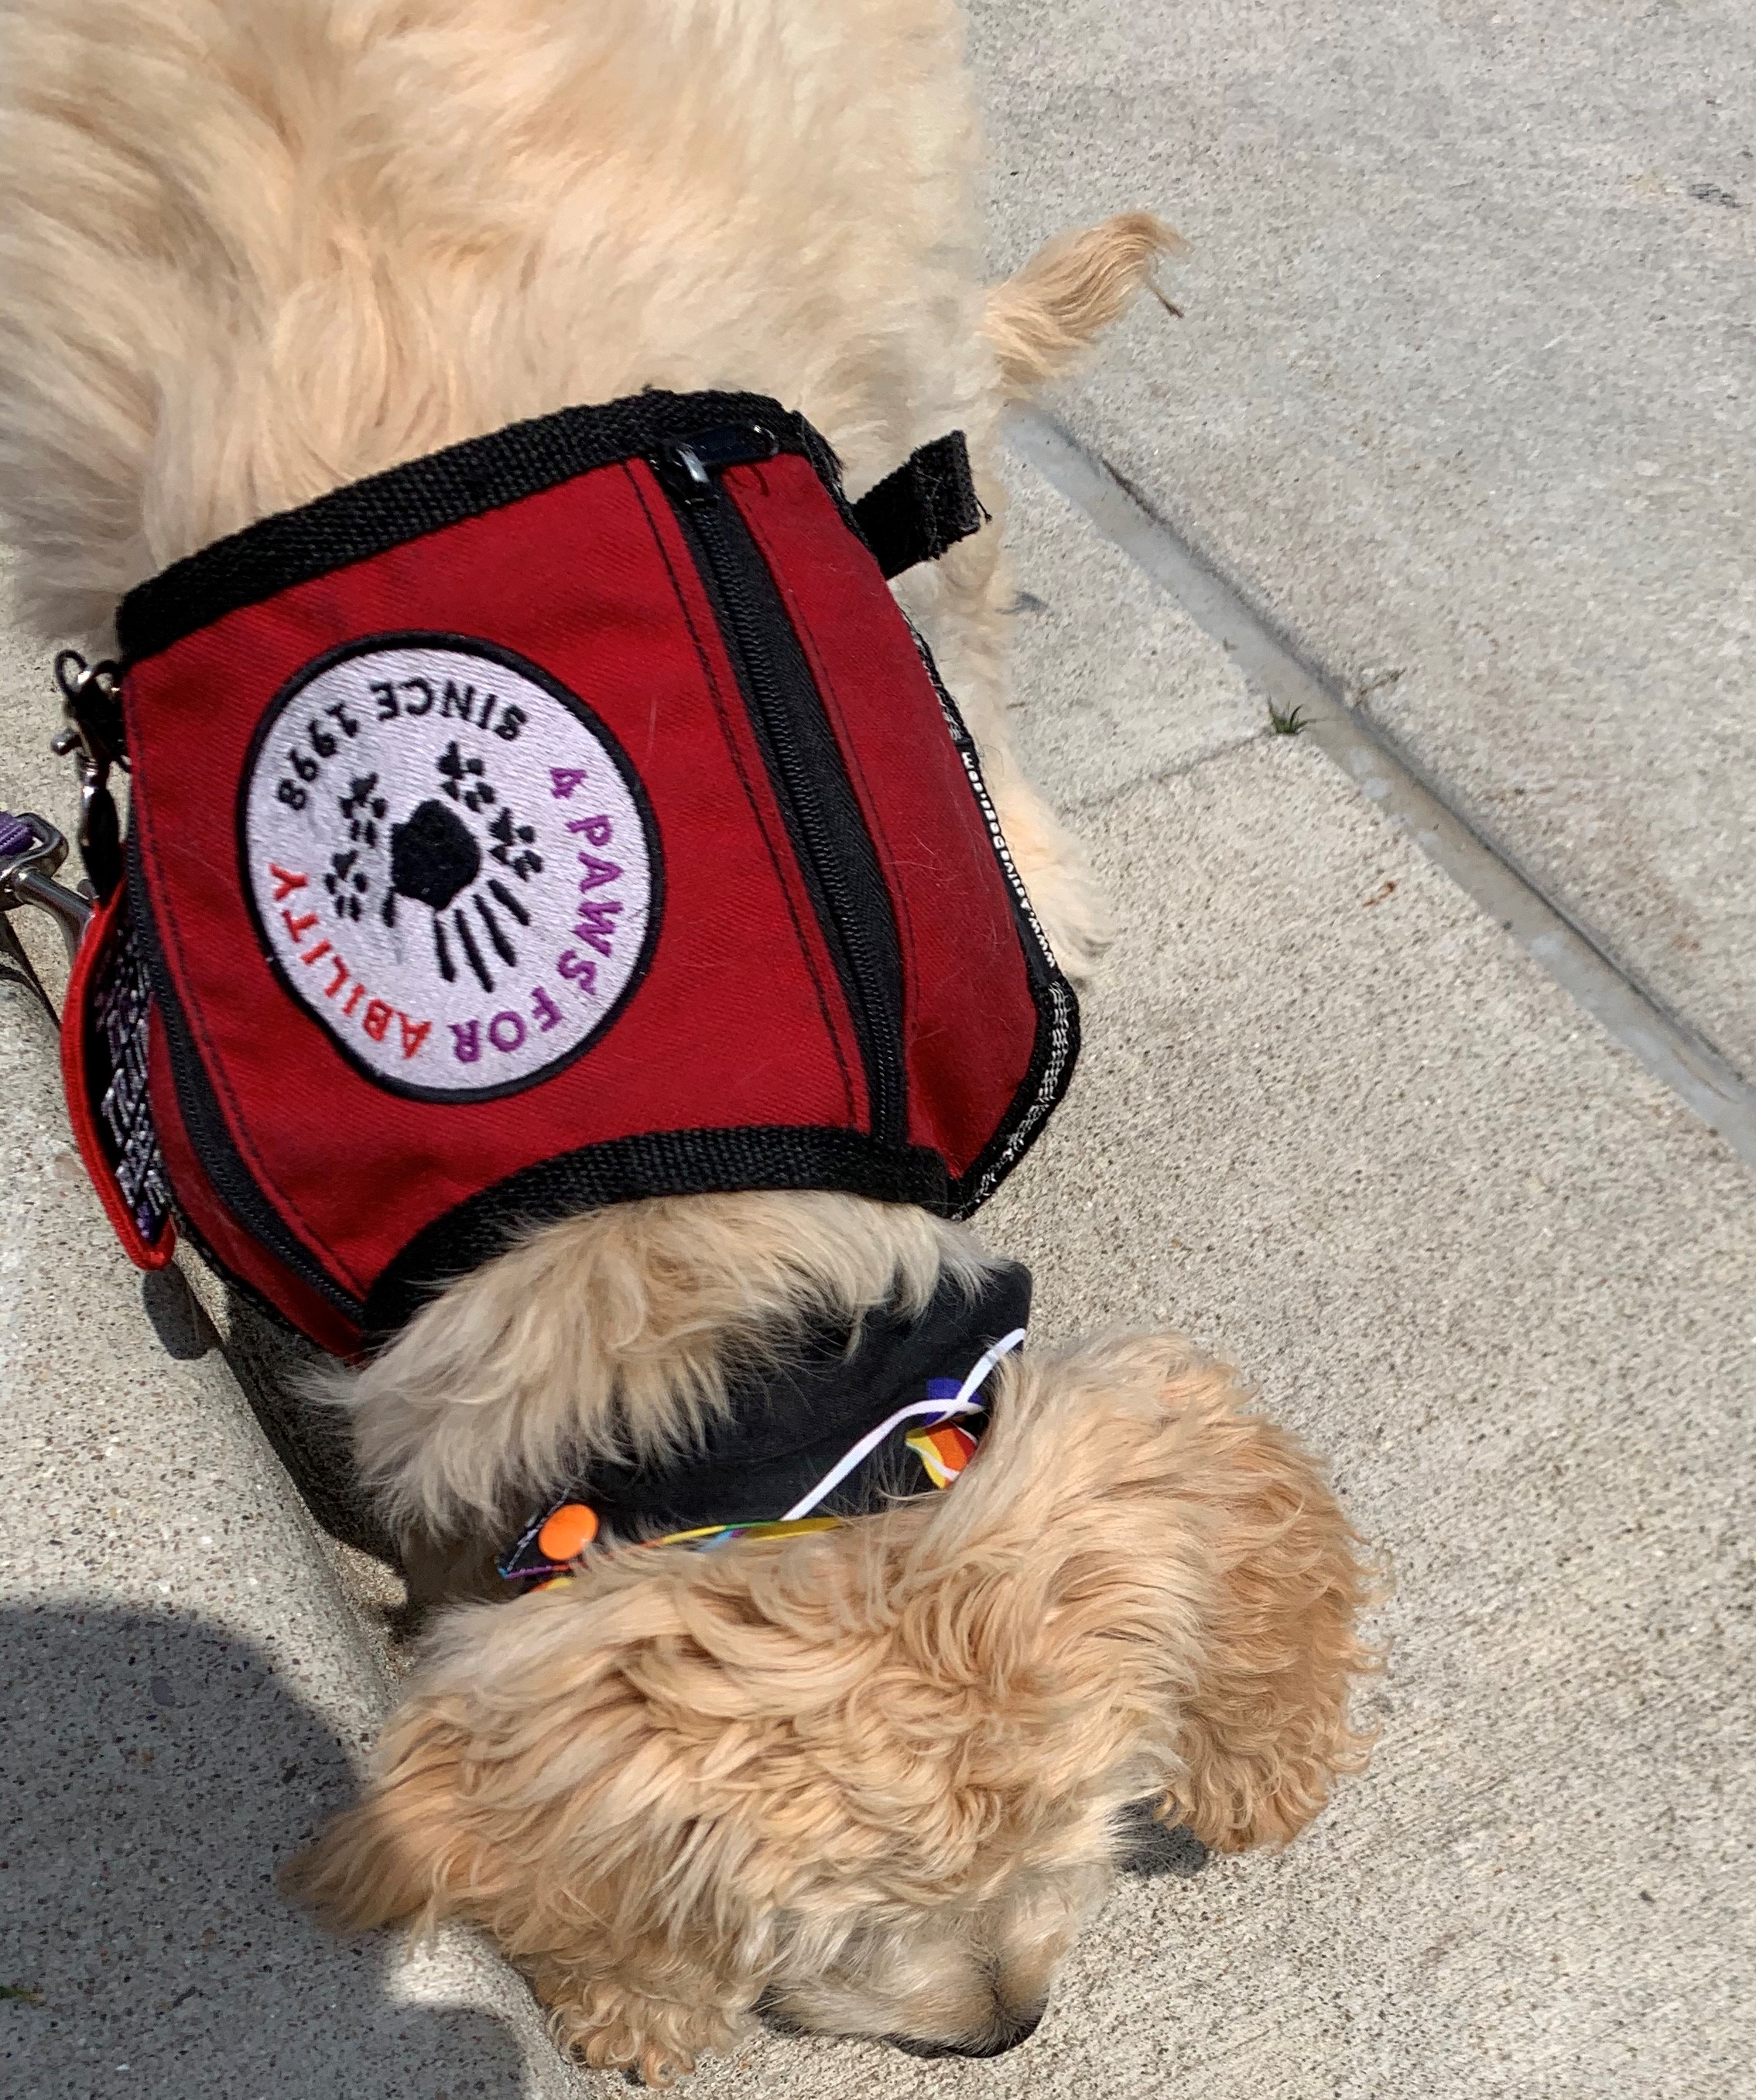 A golden doodle with a service dog vest showing 4 Paw for Ability logo